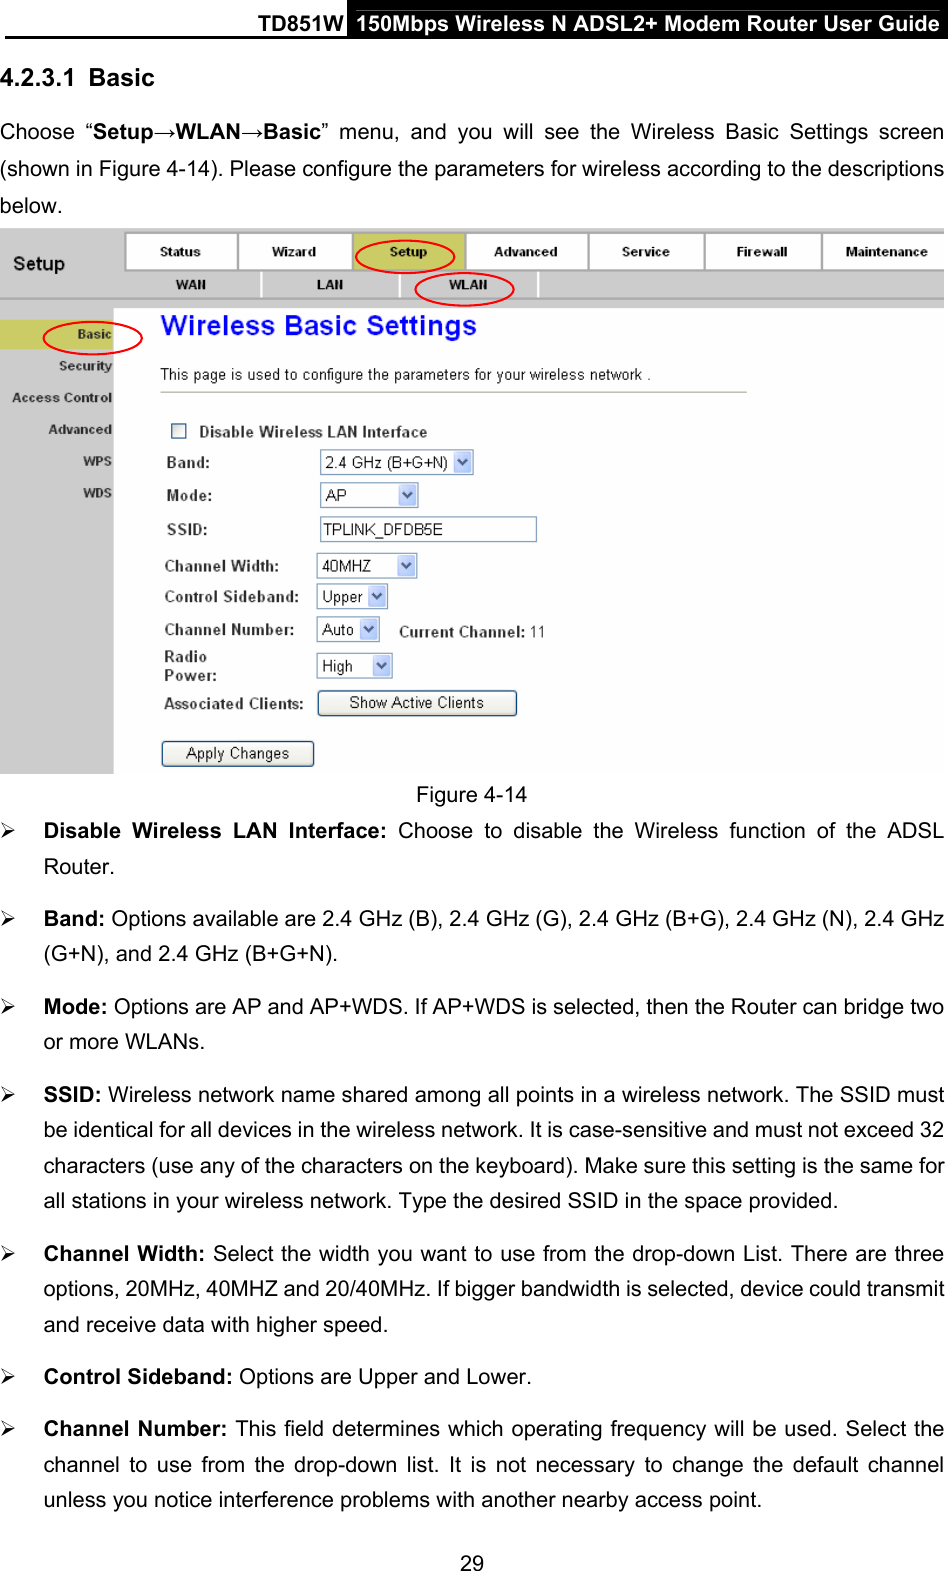 TD851W  150Mbps Wireless N ADSL2+ Modem Router User Guide 4.2.3.1  Basic Choose “Setup→WLAN→Basic” menu, and you will see the Wireless Basic Settings screen (shown in Figure 4-14). Please configure the parameters for wireless according to the descriptions below.   Figure 4-14 ¾ Disable Wireless LAN Interface: Choose to disable the Wireless function of the ADSL Router.  ¾ Band: Options available are 2.4 GHz (B), 2.4 GHz (G), 2.4 GHz (B+G), 2.4 GHz (N), 2.4 GHz (G+N), and 2.4 GHz (B+G+N). ¾ Mode: Options are AP and AP+WDS. If AP+WDS is selected, then the Router can bridge two or more WLANs. ¾ SSID: Wireless network name shared among all points in a wireless network. The SSID must be identical for all devices in the wireless network. It is case-sensitive and must not exceed 32 characters (use any of the characters on the keyboard). Make sure this setting is the same for all stations in your wireless network. Type the desired SSID in the space provided. ¾ Channel Width: Select the width you want to use from the drop-down List. There are three options, 20MHz, 40MHZ and 20/40MHz. If bigger bandwidth is selected, device could transmit and receive data with higher speed. ¾ Control Sideband: Options are Upper and Lower. ¾ Channel Number: This field determines which operating frequency will be used. Select the channel to use from the drop-down list. It is not necessary to change the default channel unless you notice interference problems with another nearby access point. 29 